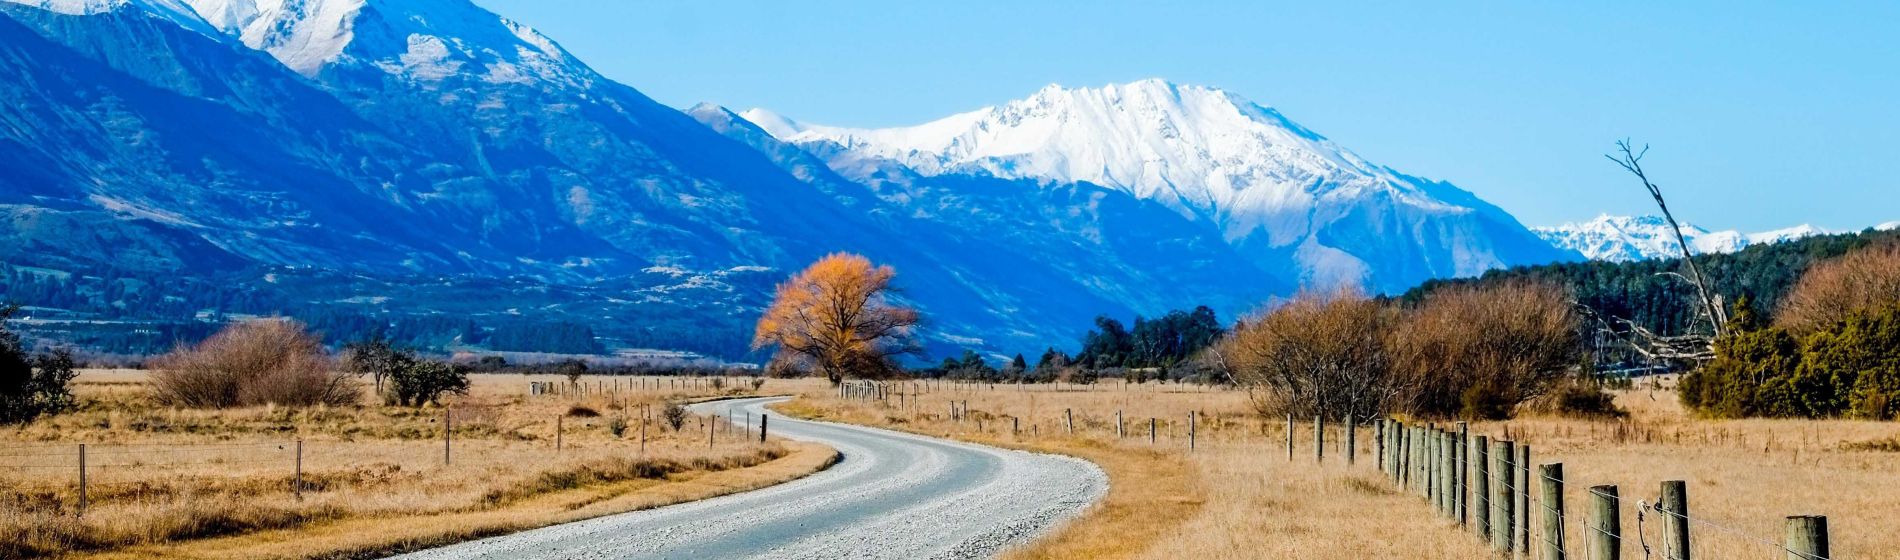 mountain_landscape_with_unsealed_road_and_clear_sky_glenorchy_new_zealand.jpg